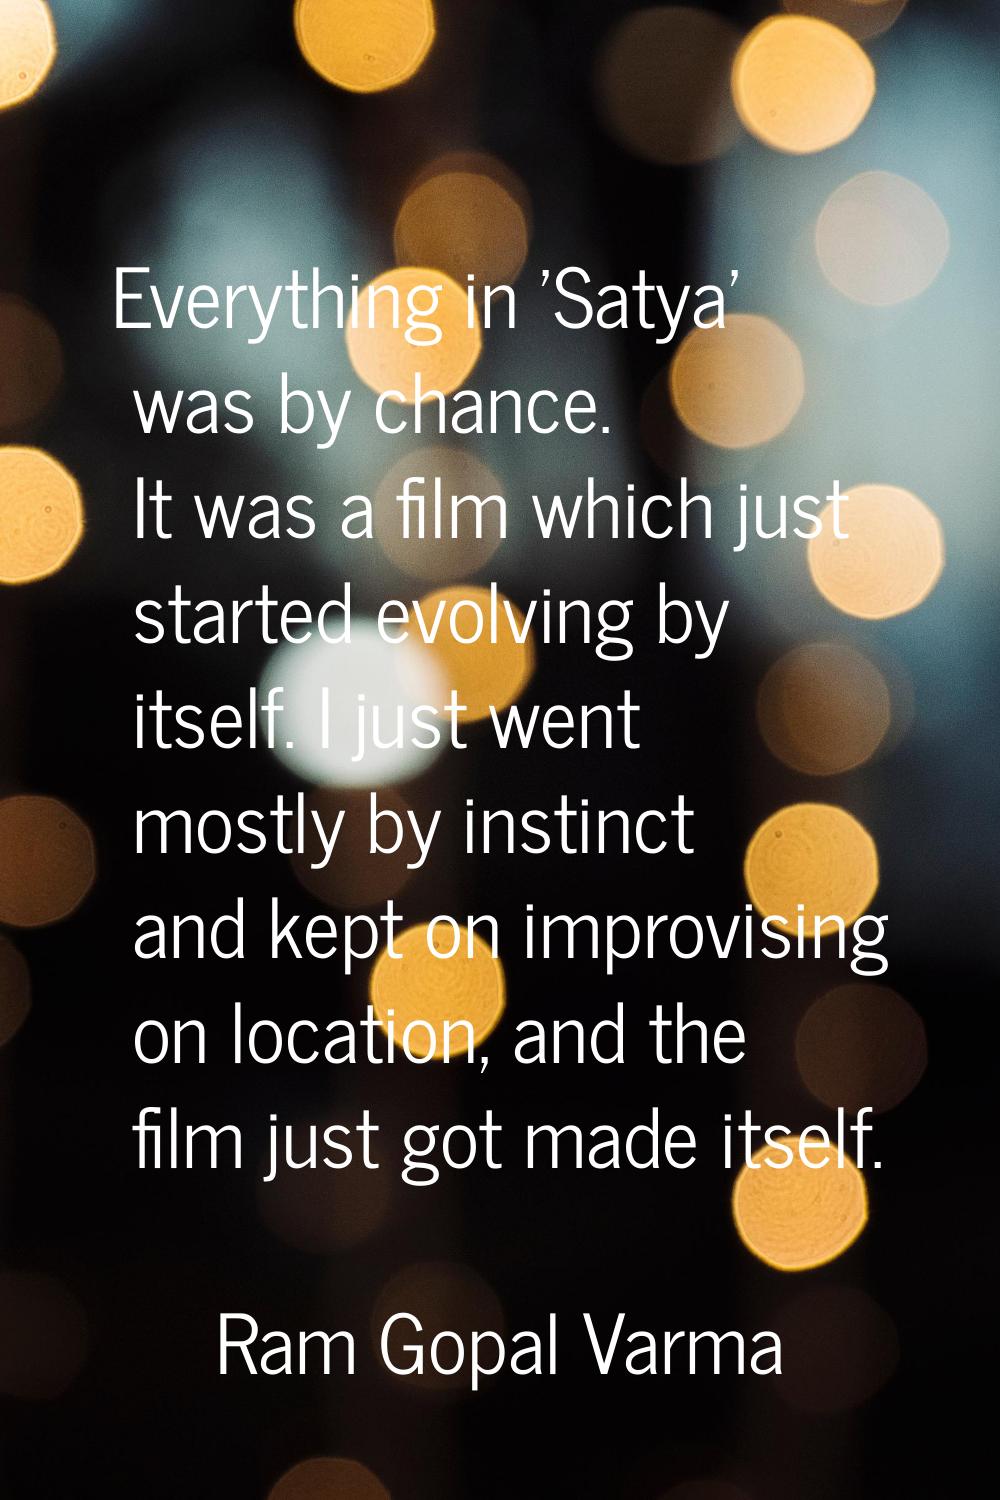 Everything in 'Satya' was by chance. It was a film which just started evolving by itself. I just we